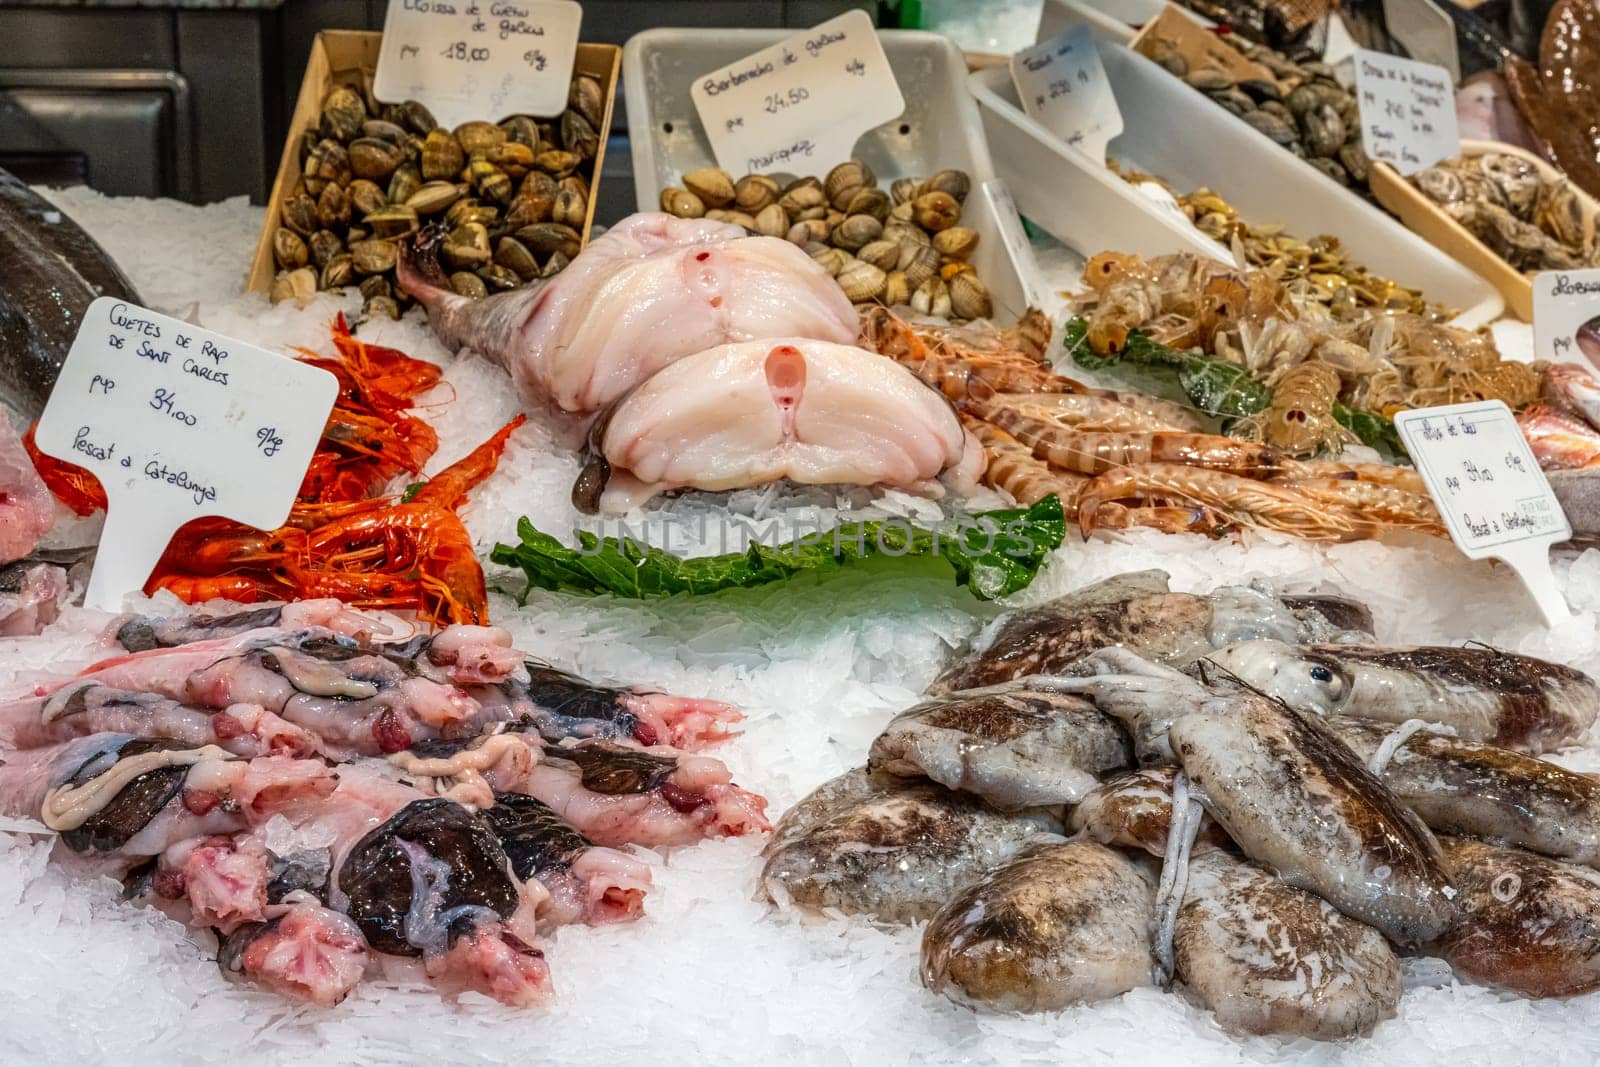 Market stall with fresh fish and seafood seen in Barcelona, Spain